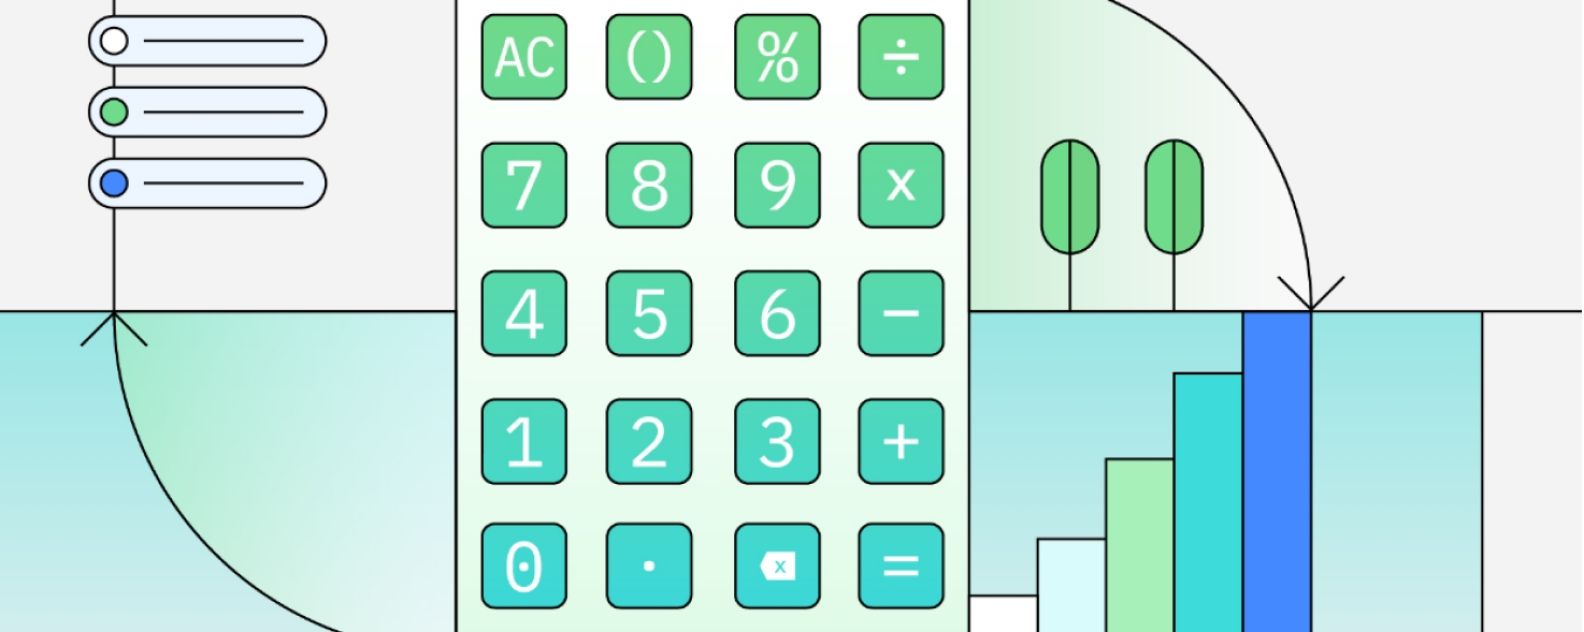 Illustration of a calculator and environmental elements 